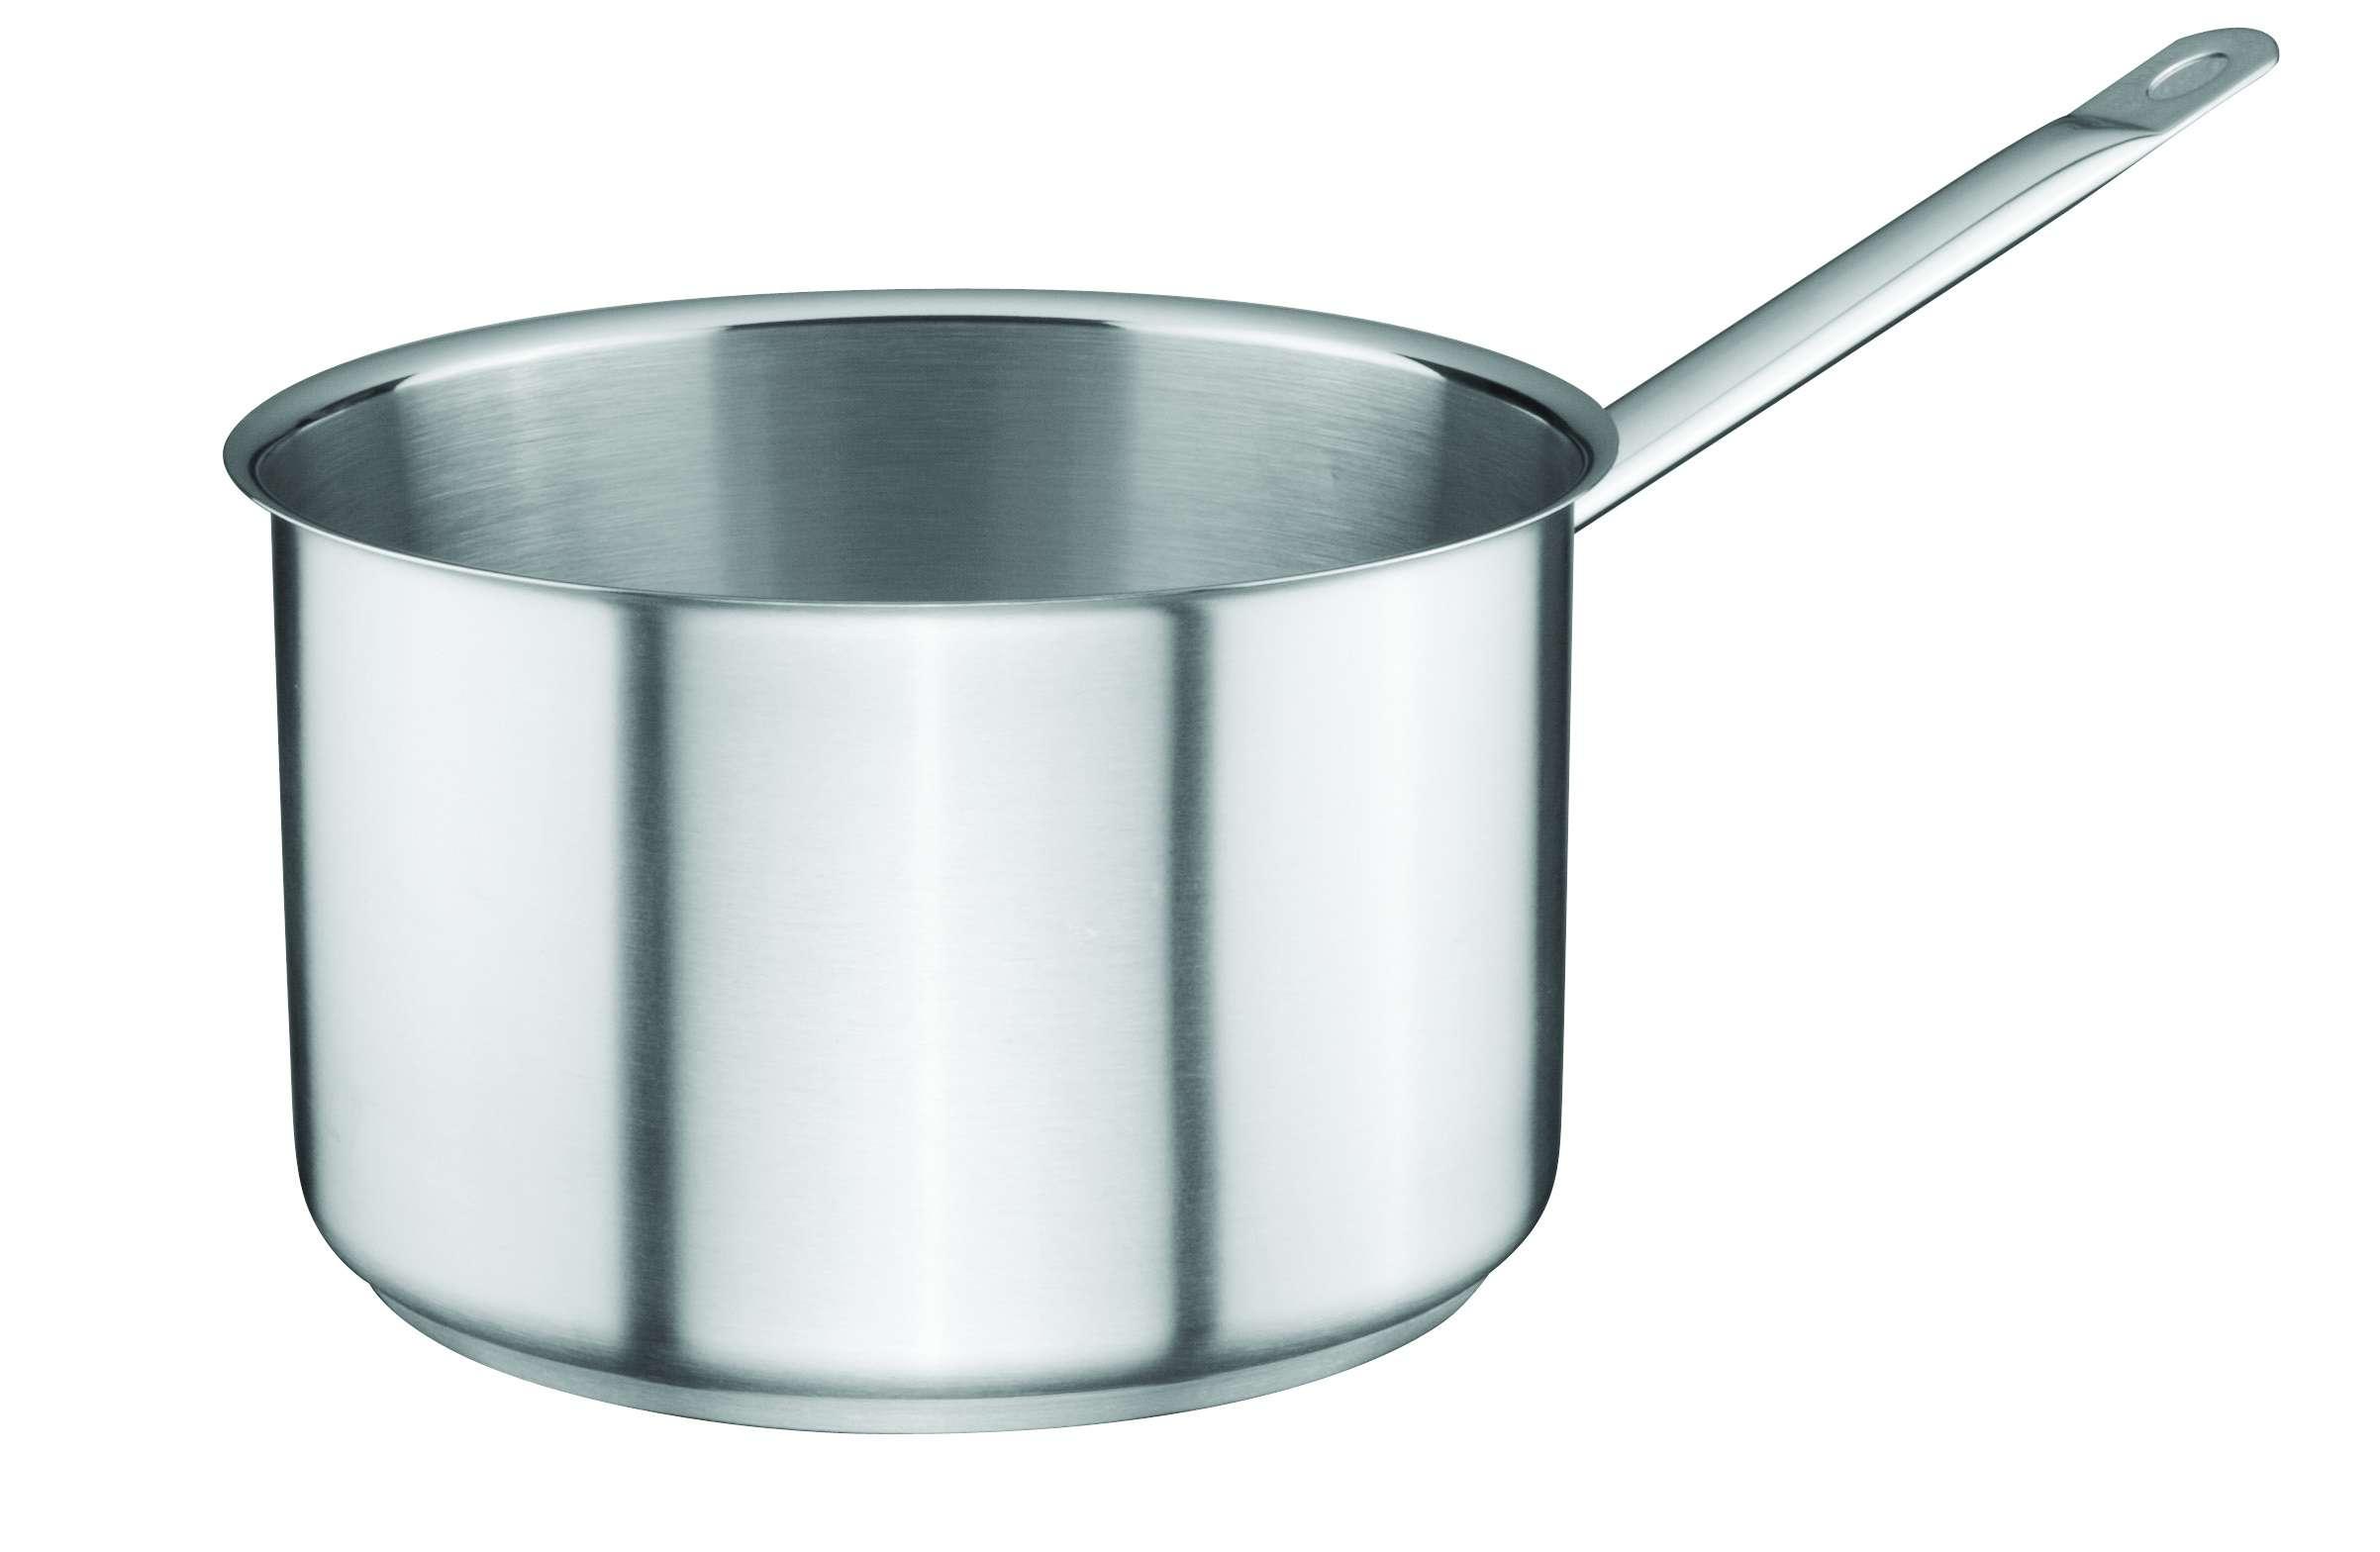 Ozti Stainless Steel Sauce Pan 28 cm x 17 cm Silver Stainless Steel